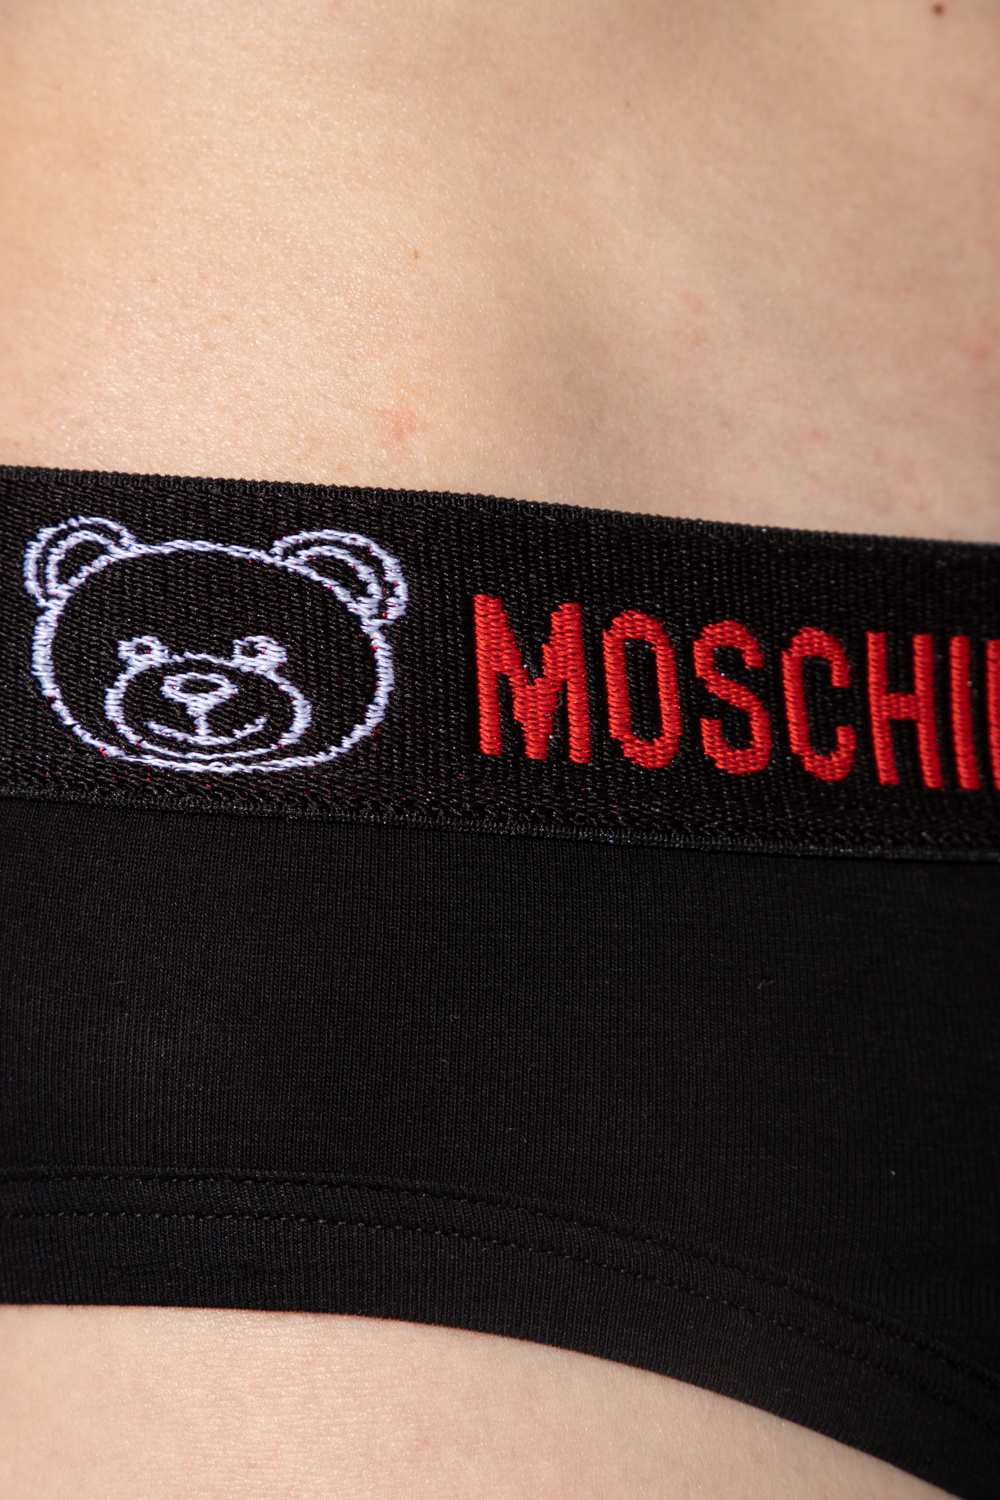 Moschino GOLDEN GOOSE: THE PERFECT IMPERFECTION